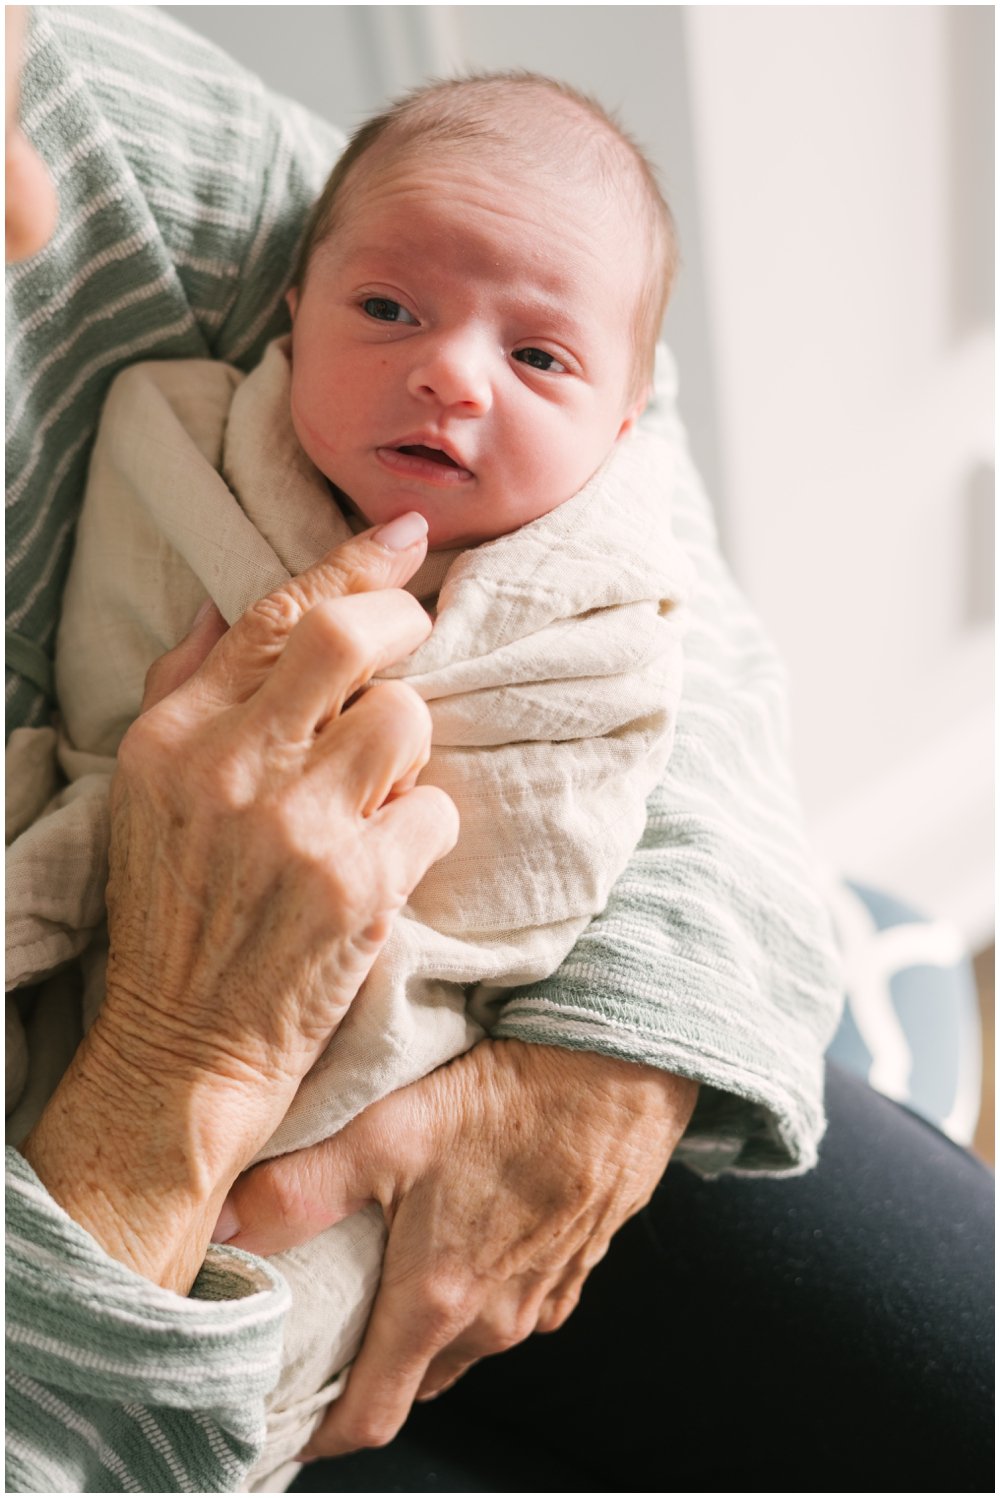 Grandma holding newborn with eyes open during session | NKB Photo